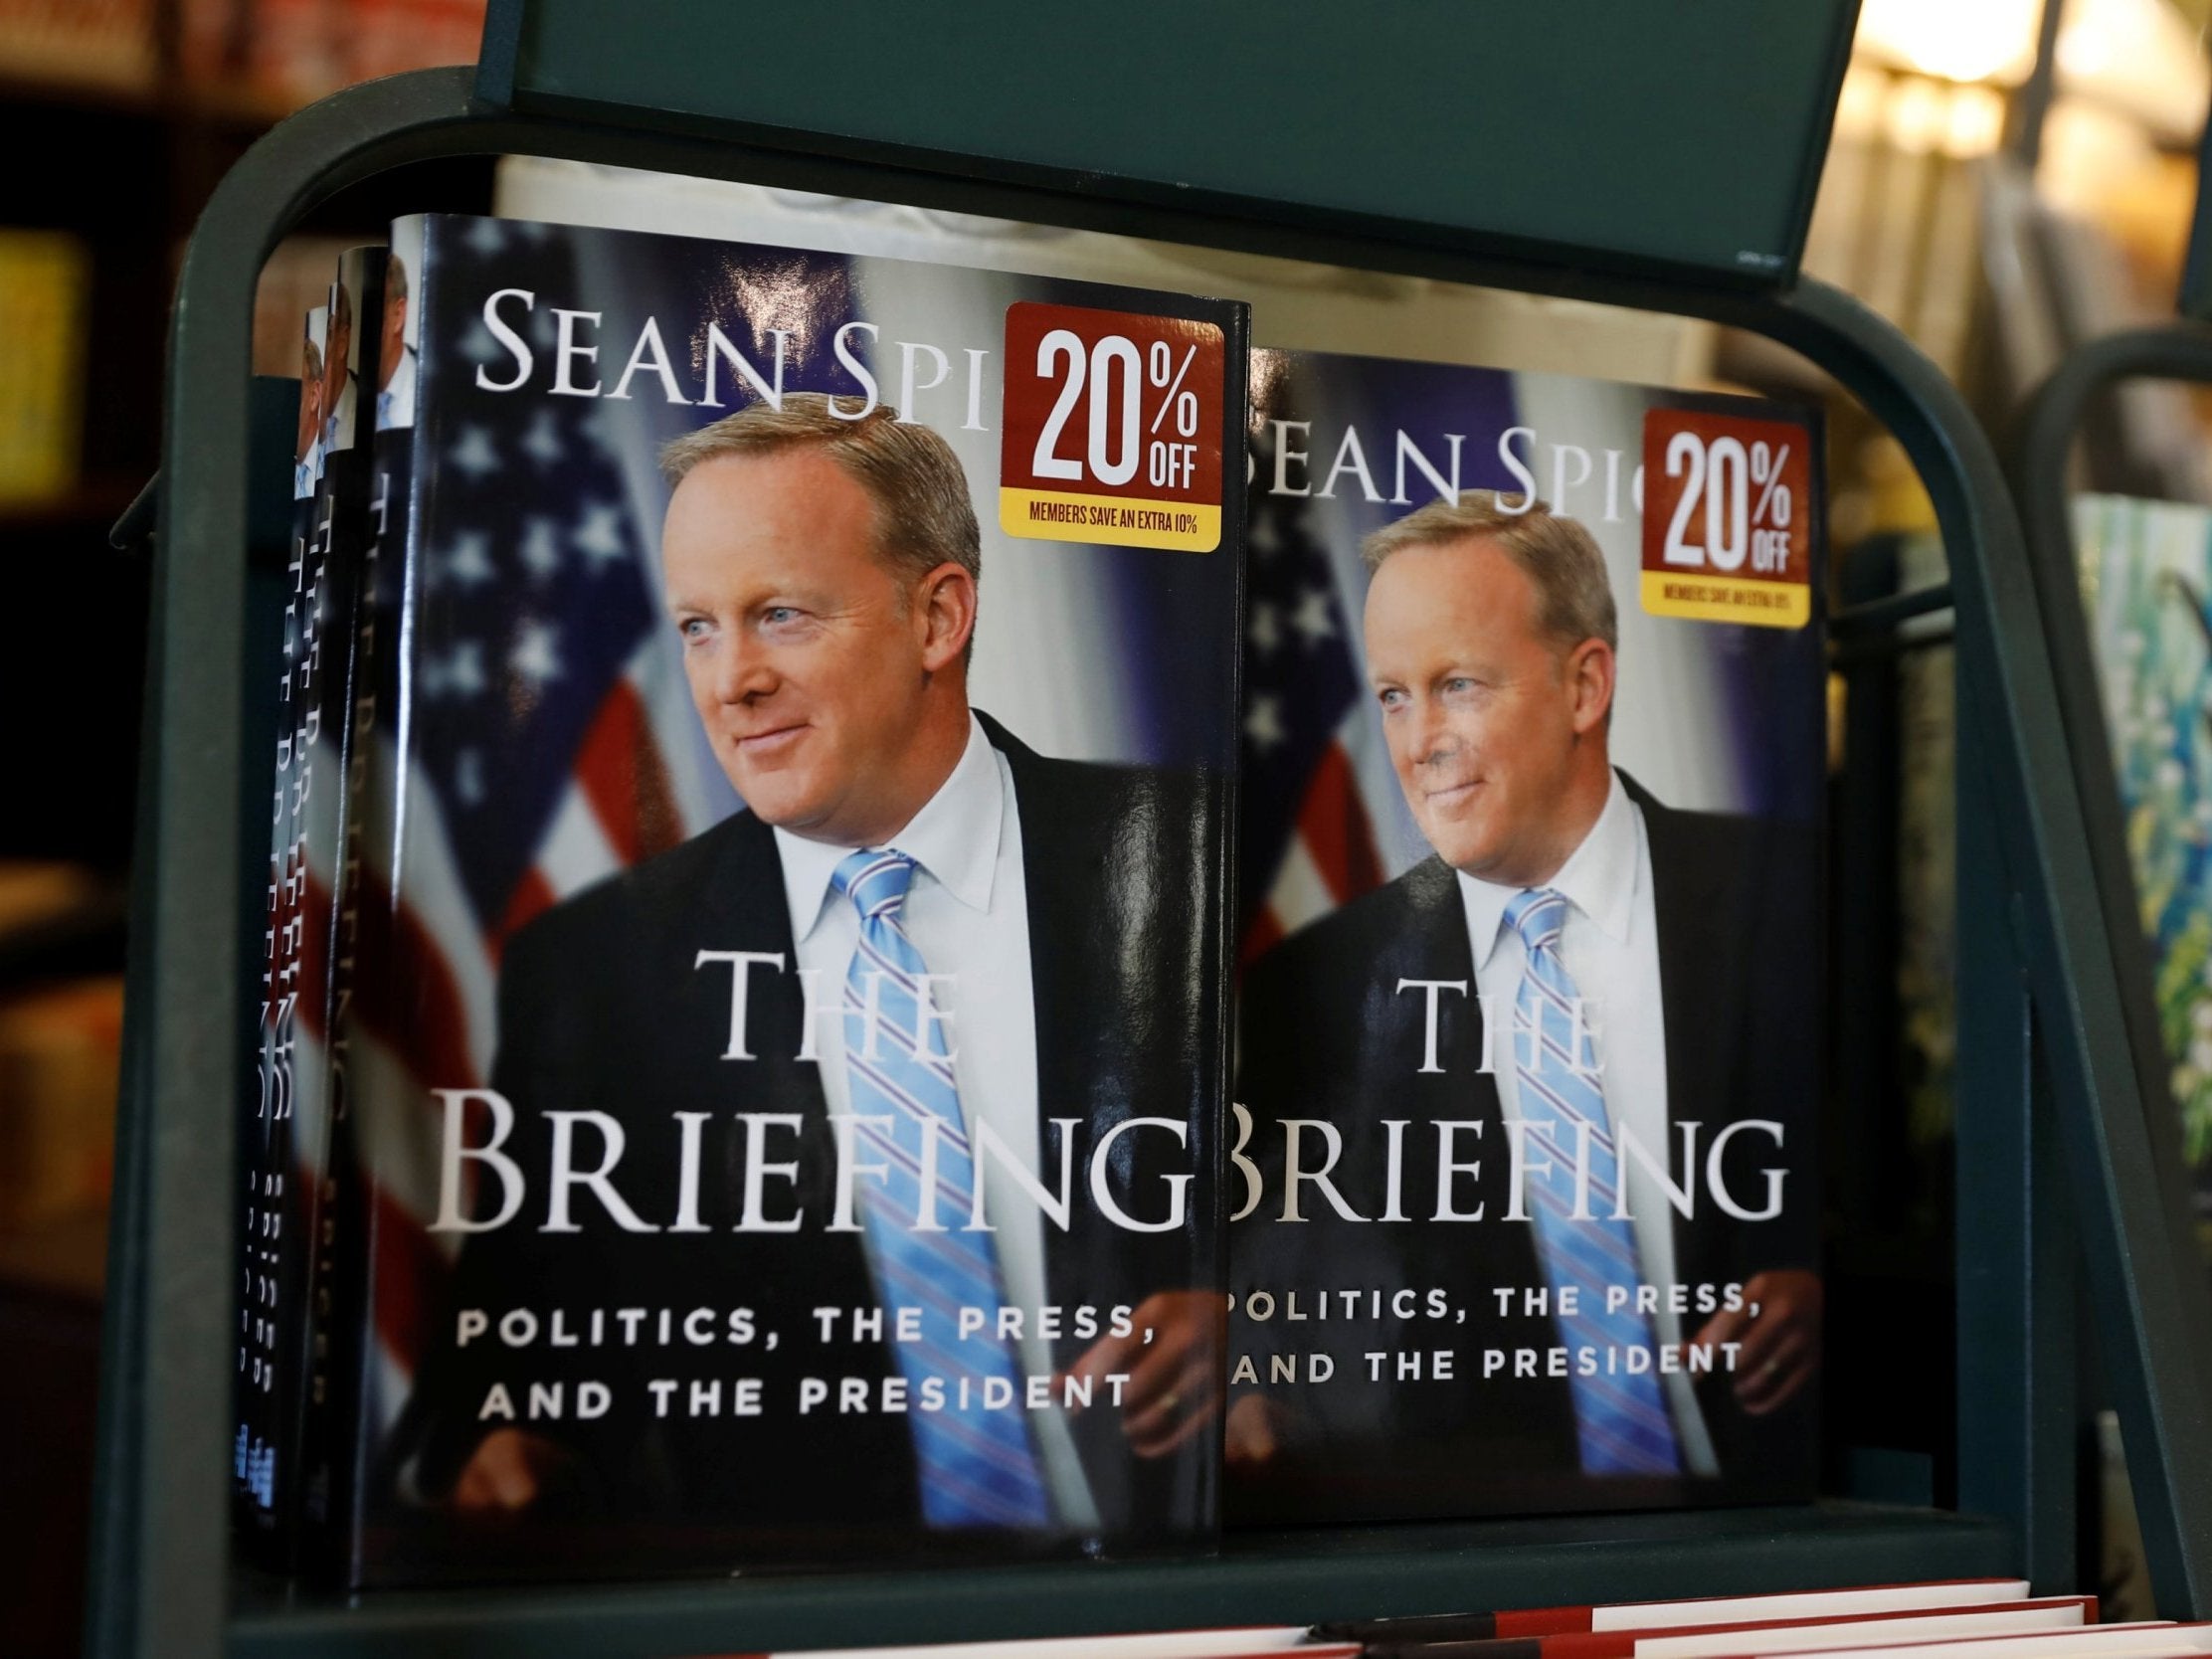 The heckler said 'The Briefing' is a 'garbage book' and told Sean Spicer he was 'lying in [his] book'